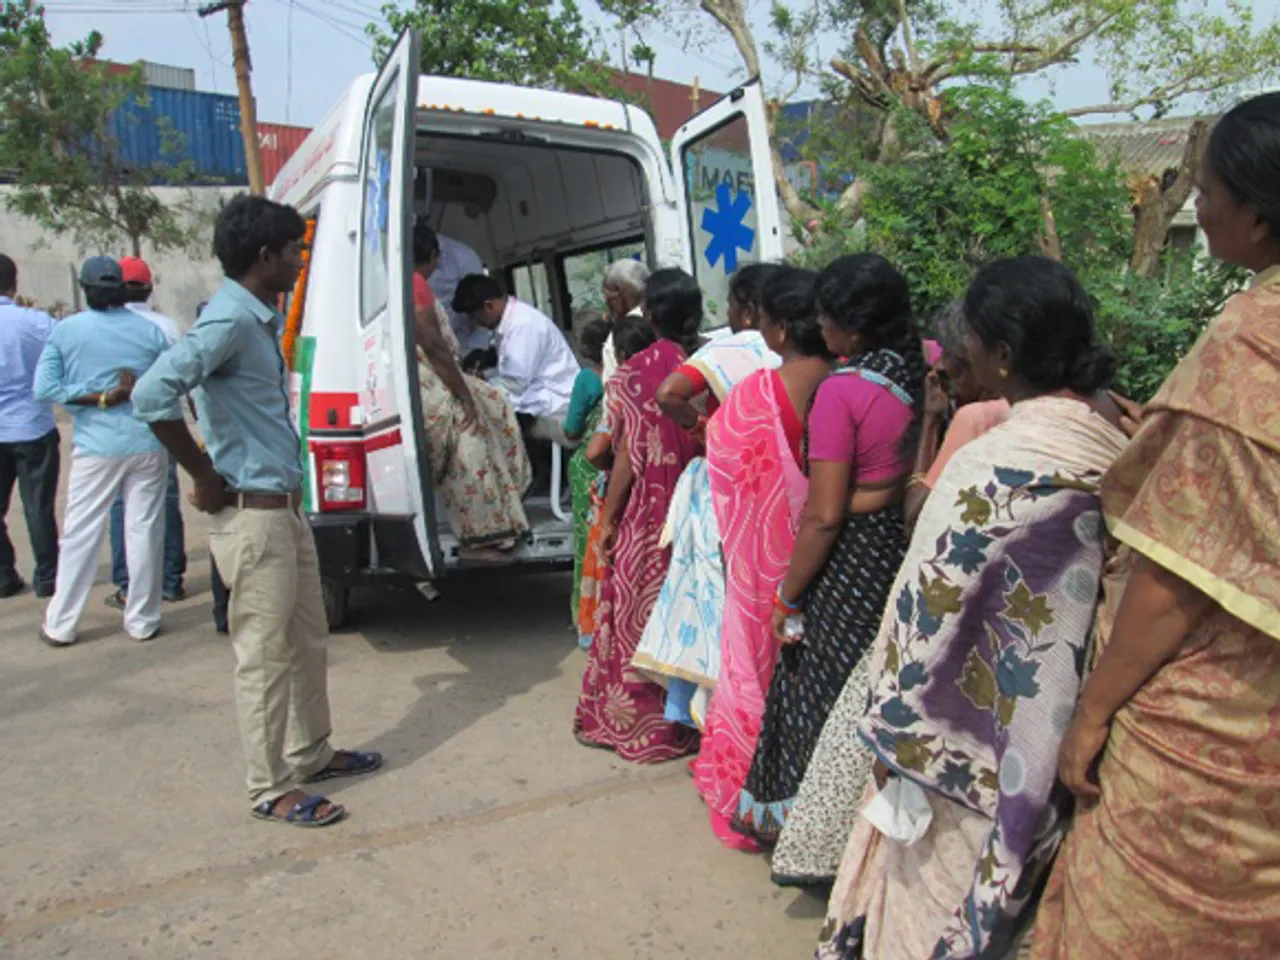 100th Mobile Van Added By Wockhardt To M'tra Healthcare Service